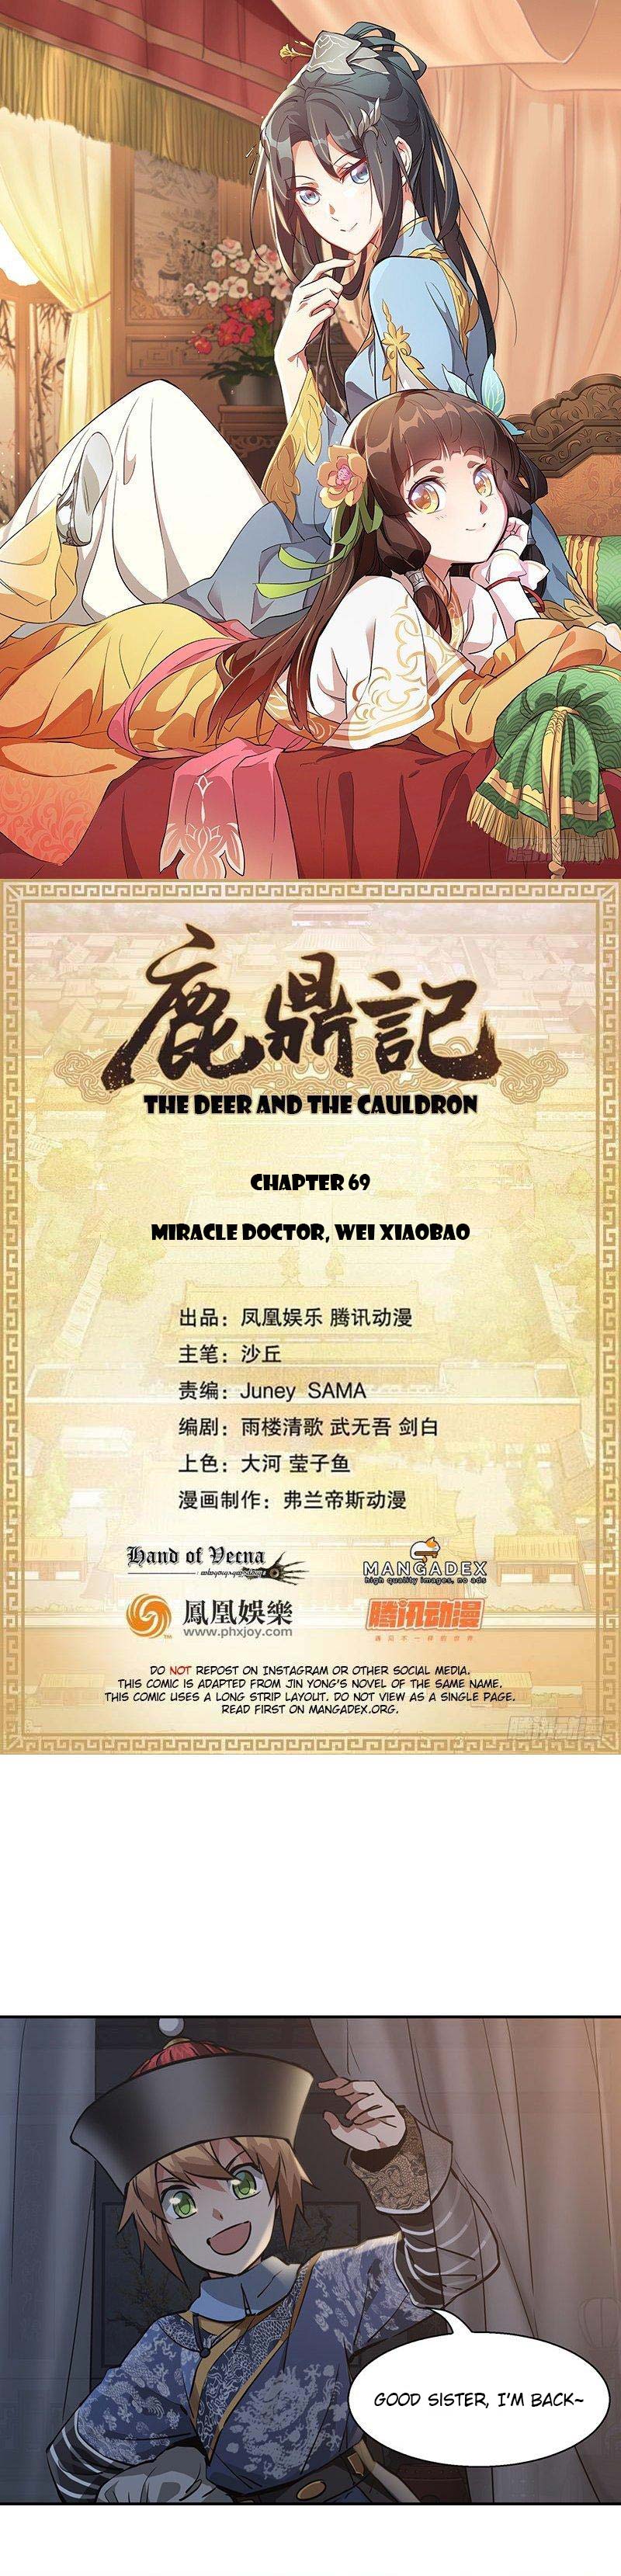 The Deer and the Cauldron Ch. 69 Miracle Doctor, Wei Xiaobao